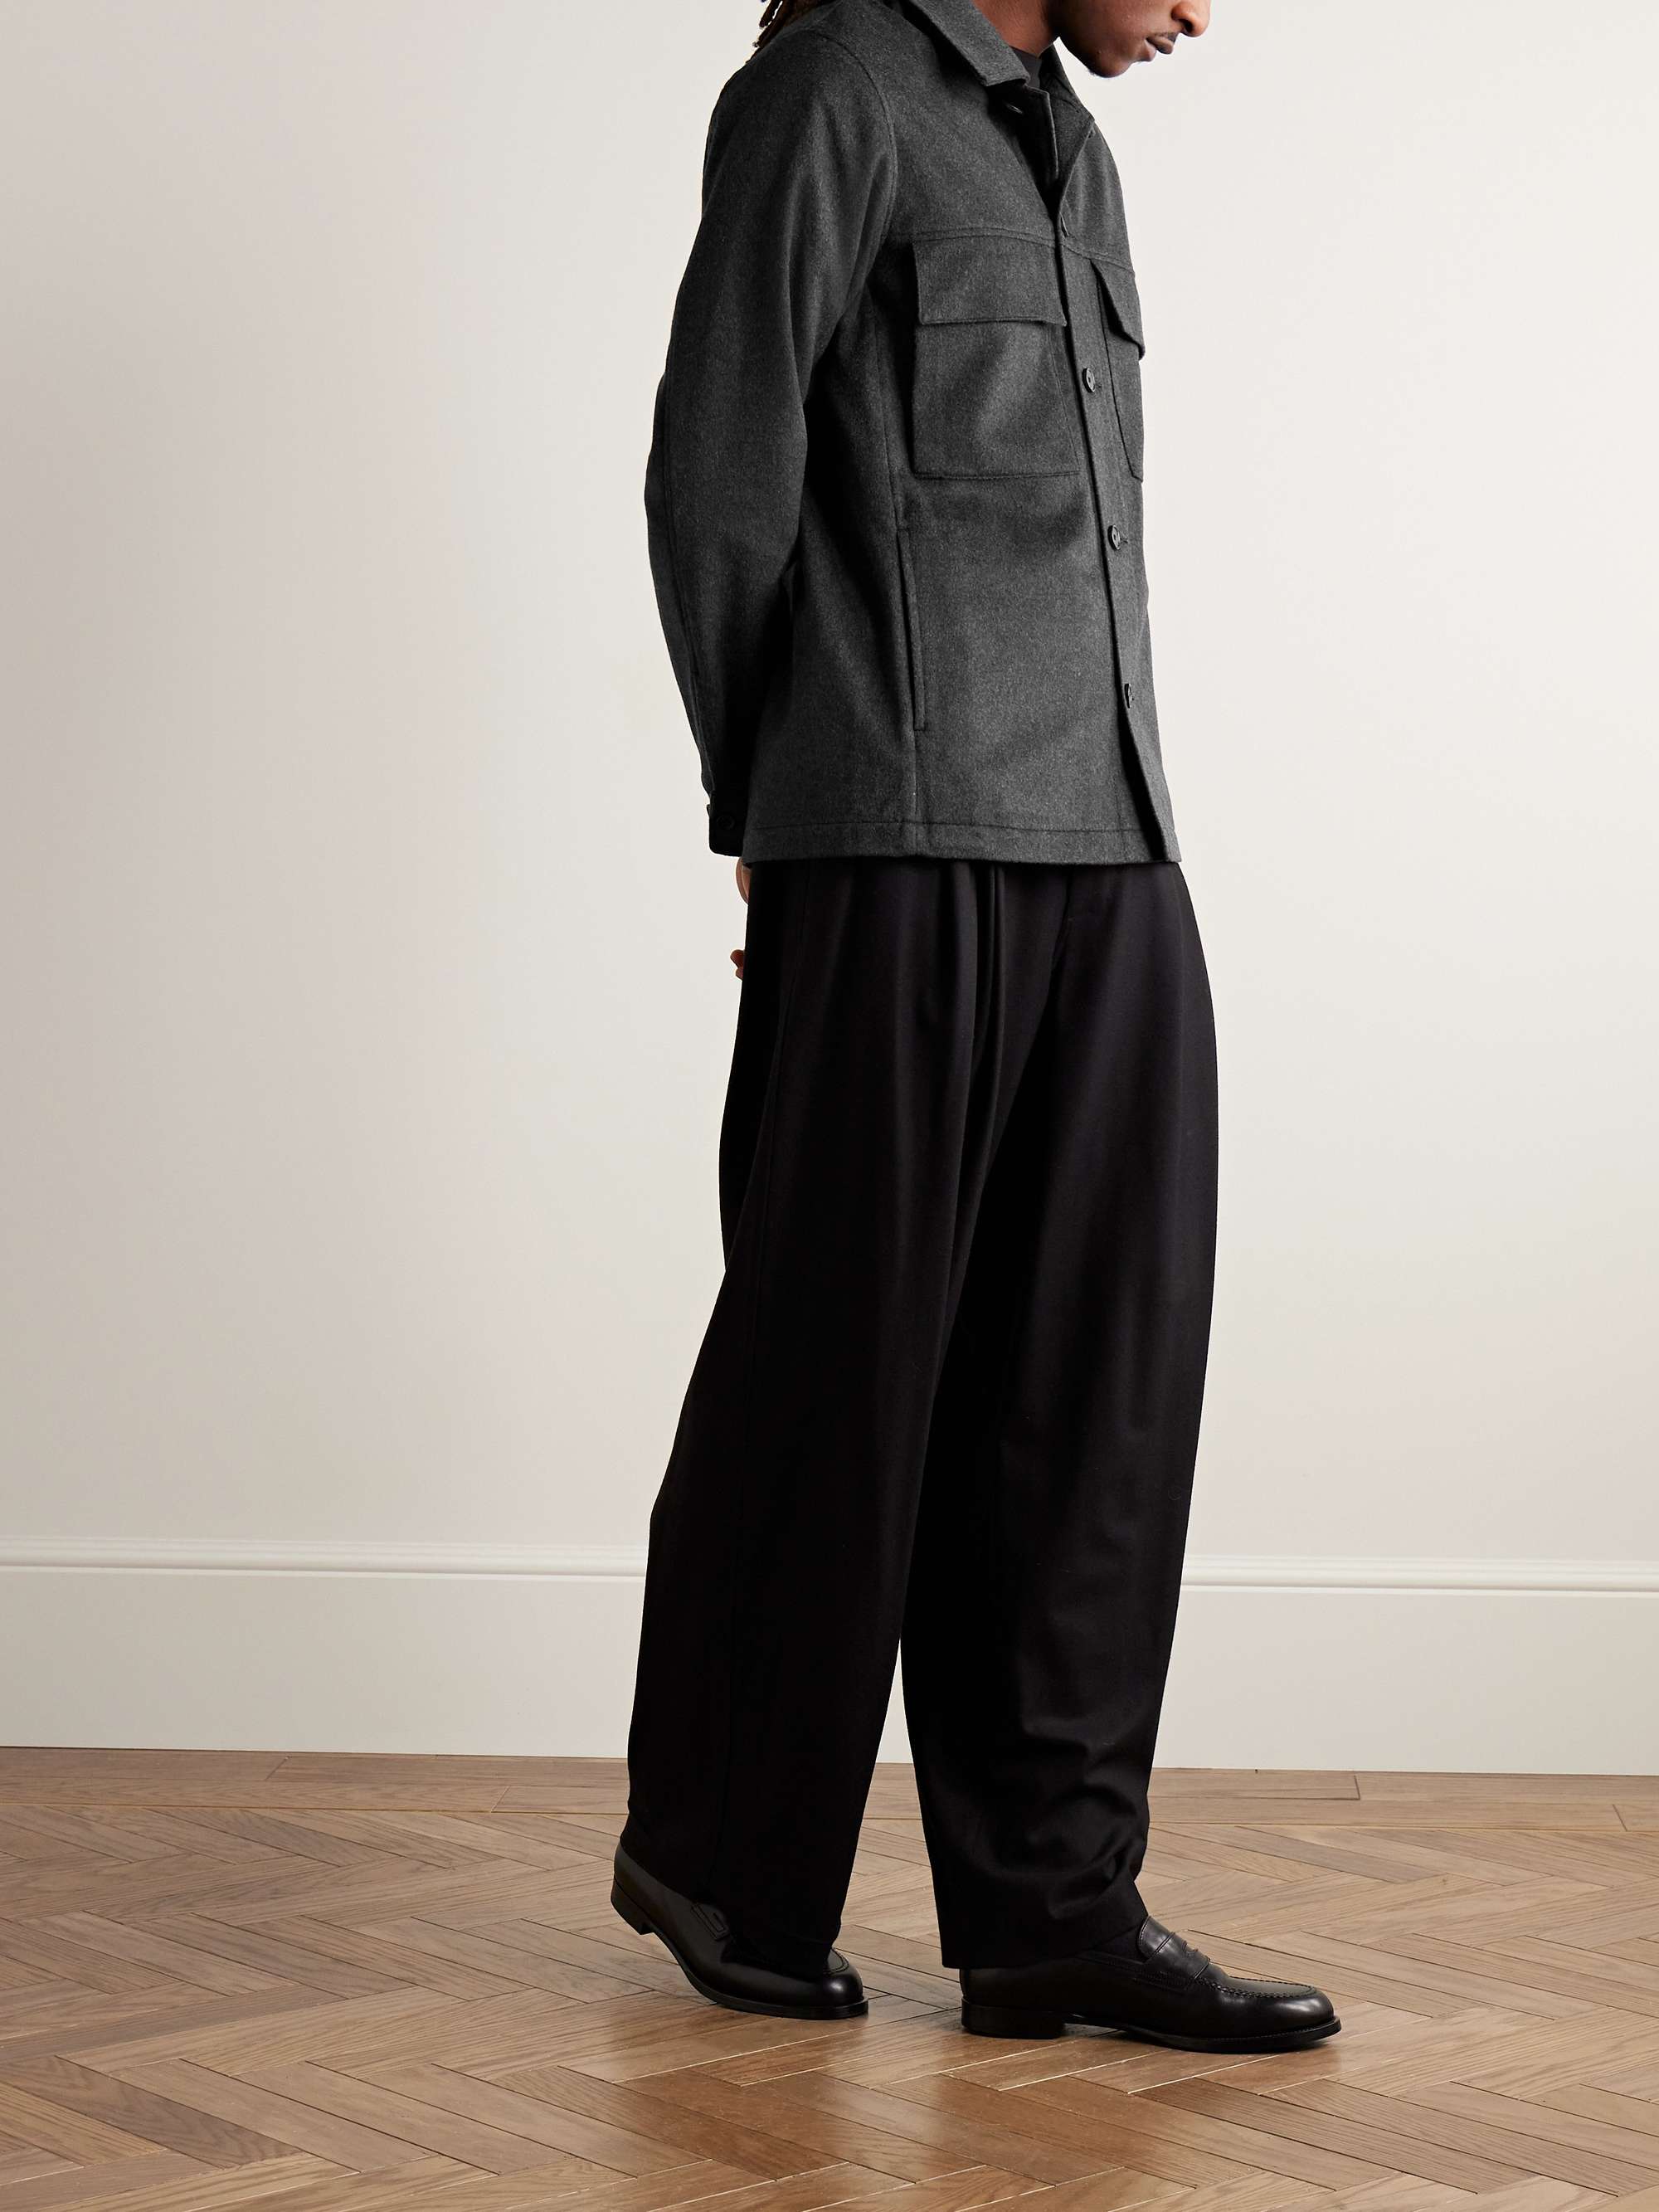 THE ROW Berto Wide-Leg Pleated Cashmere-Blend Trousers for Men